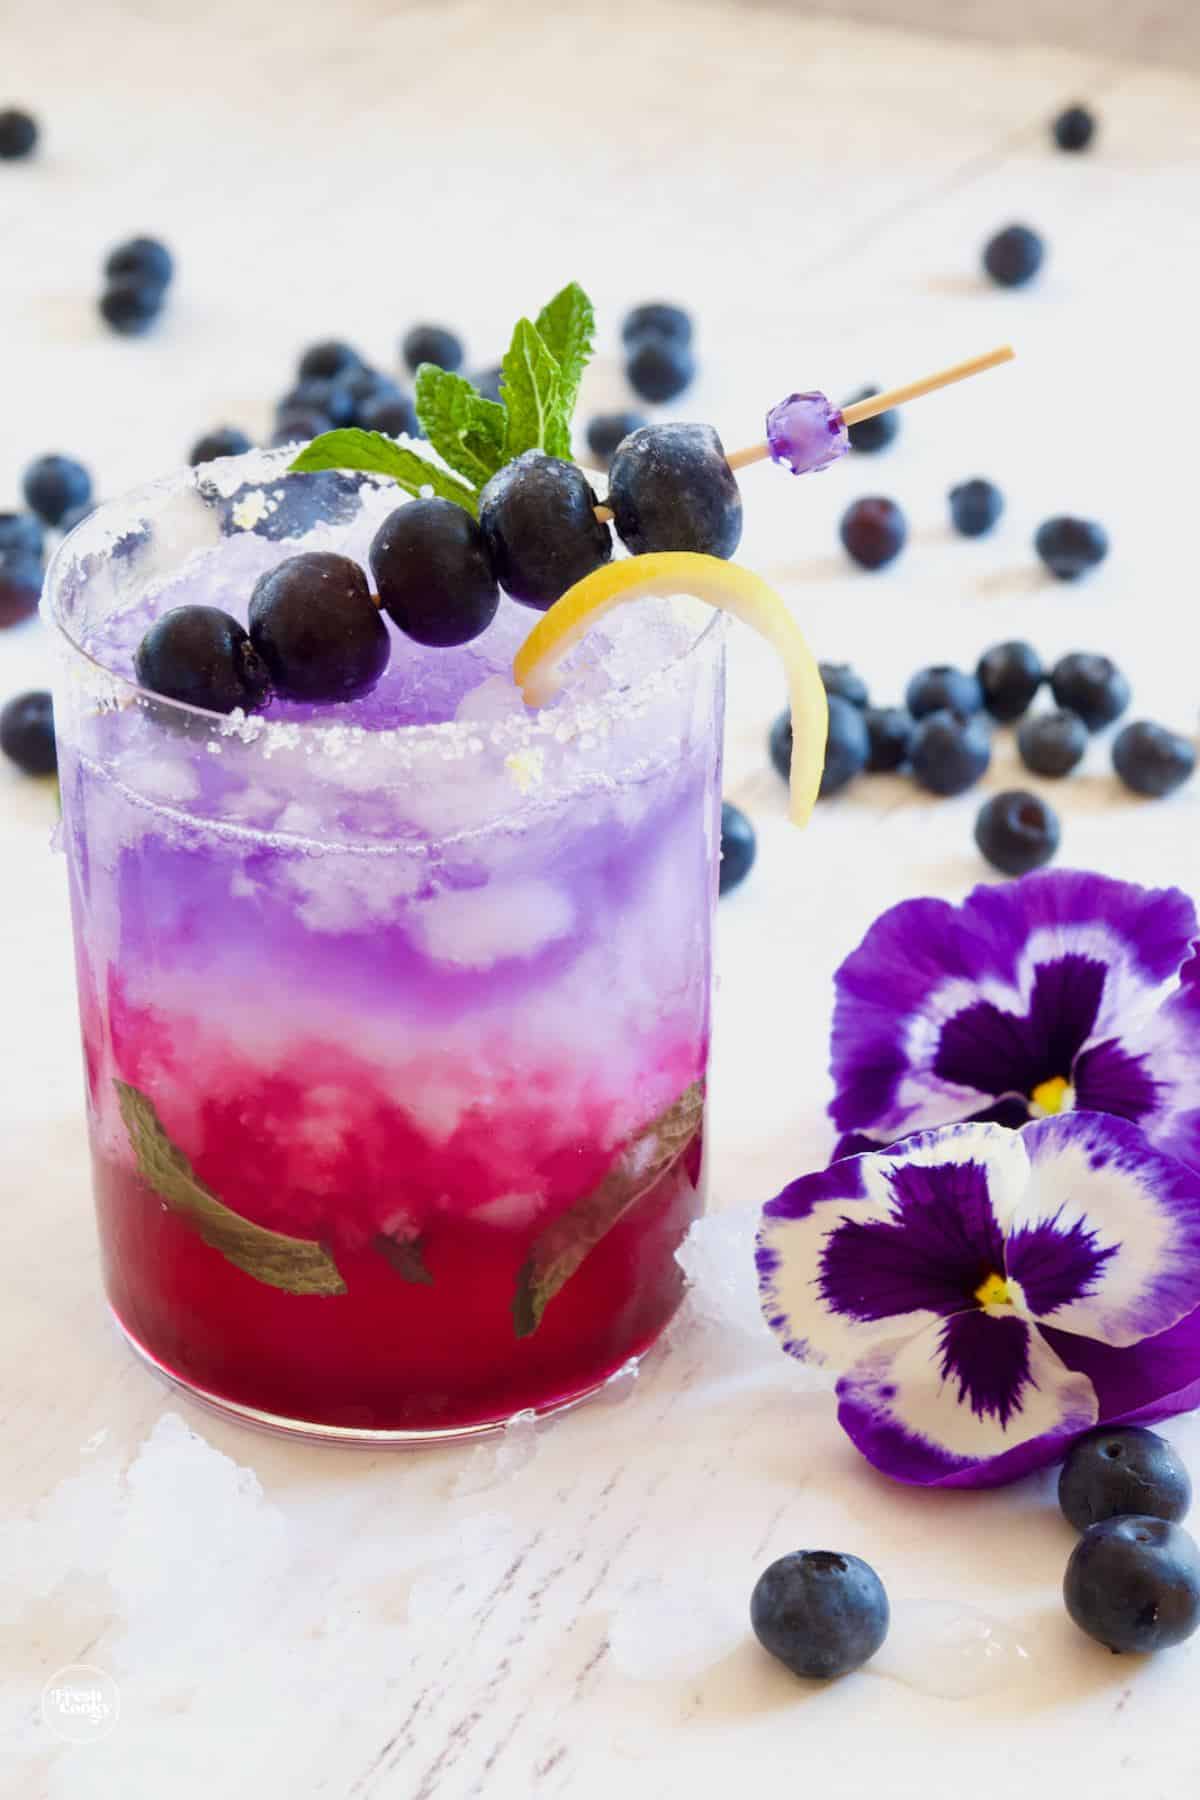 A layered cocktail with red white and blue coloring, using blueberry syrup, ginger beer and Empress gin.